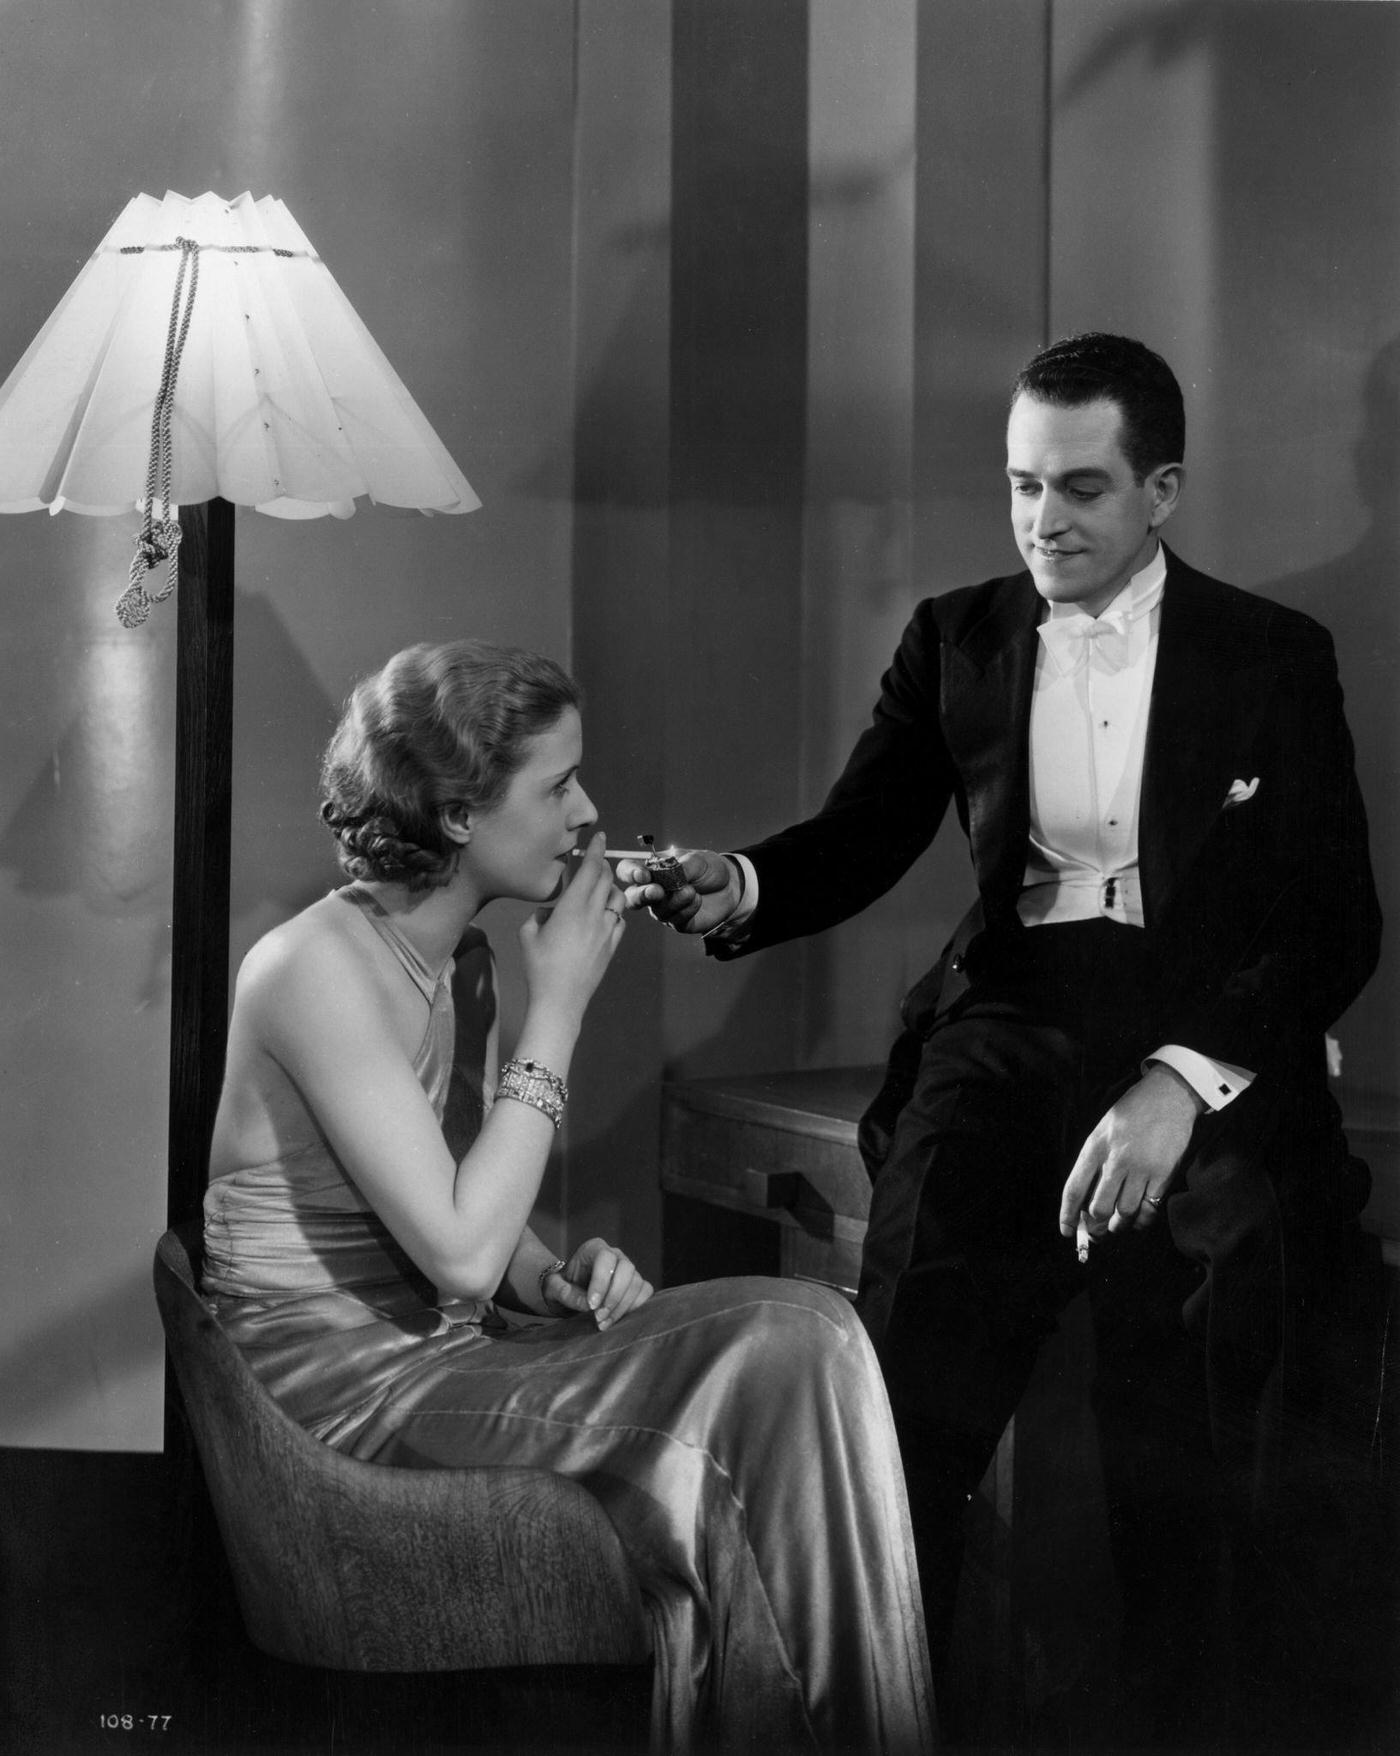 Molly Lamont accepts a light from Gene Gerrard in a scene from 'Lucky Girl', 1935